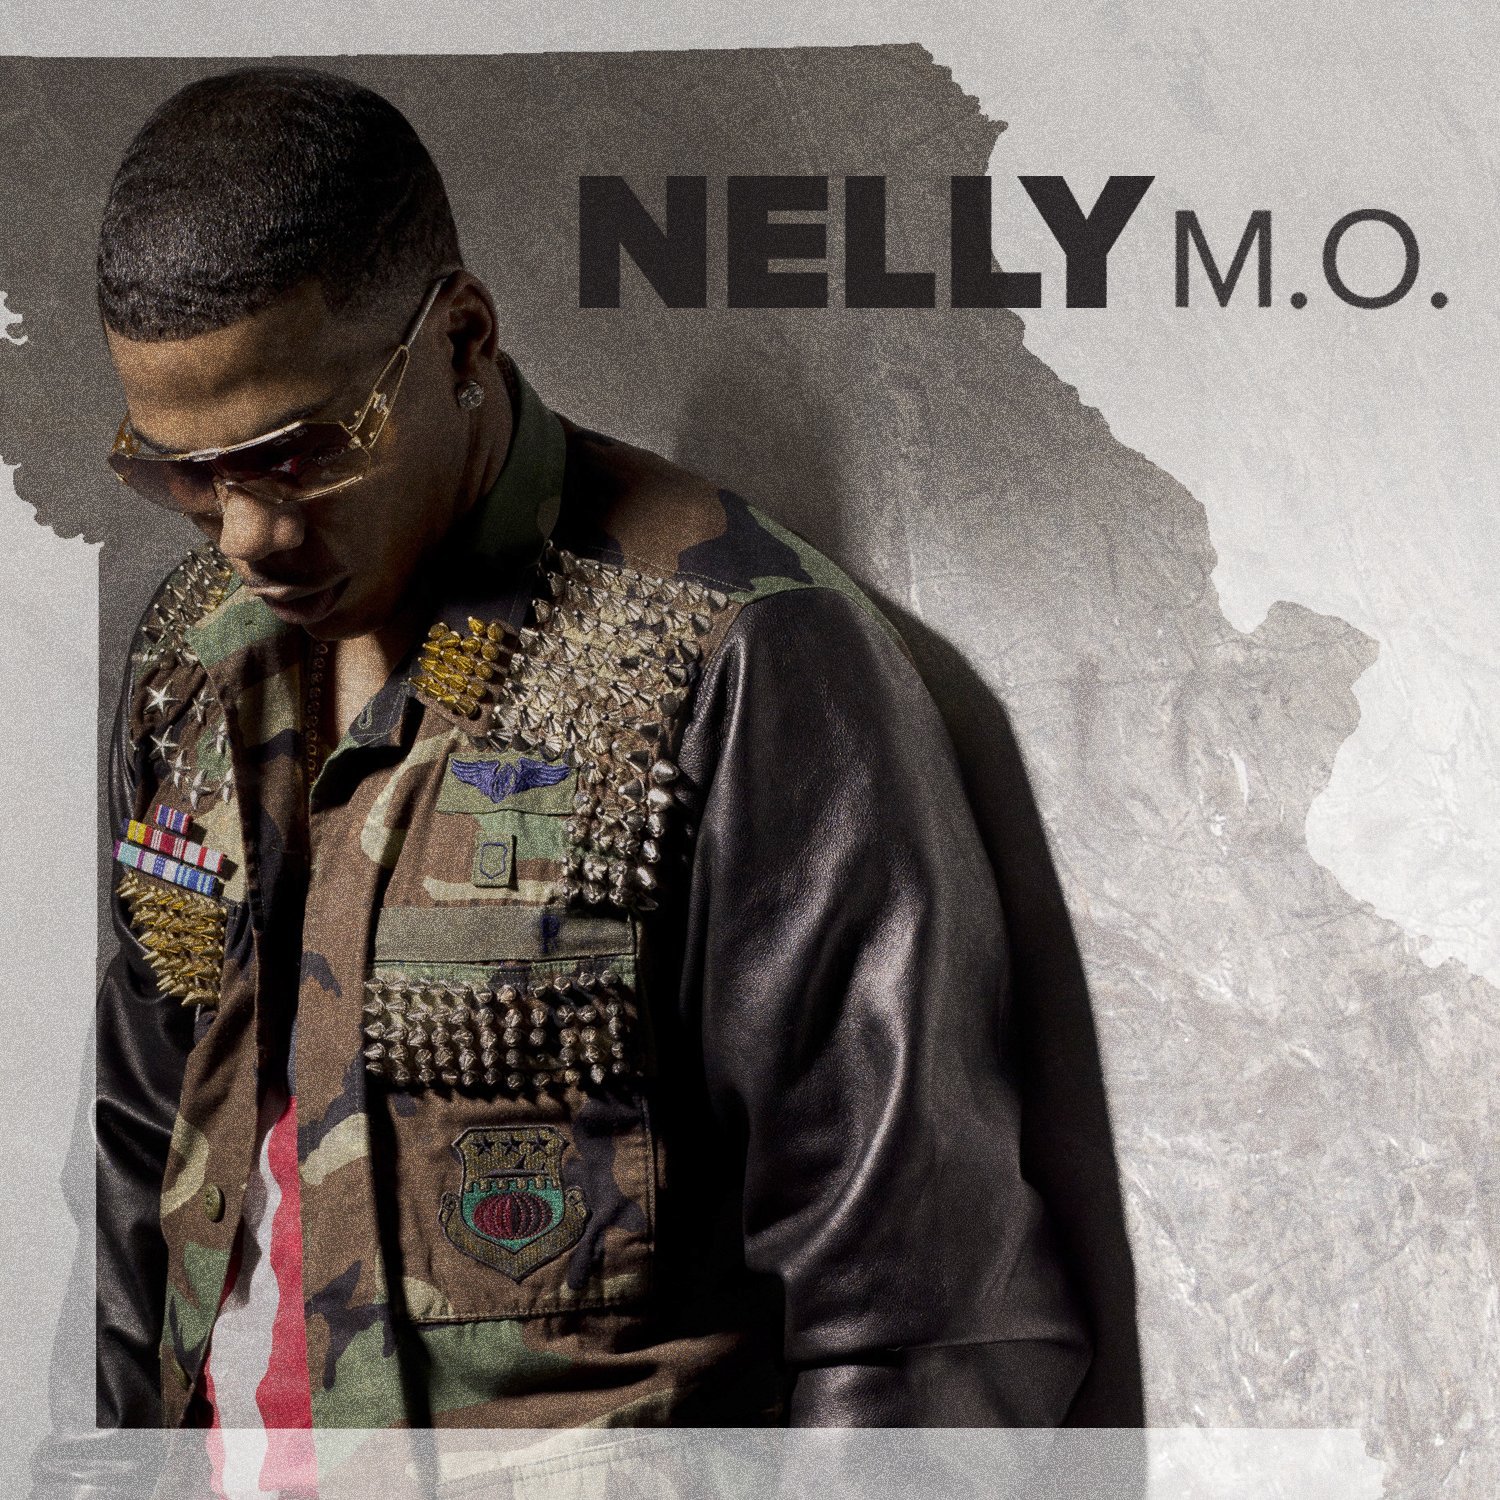 Nelly M.O. (Album Cover & Track List) HipHopNMore